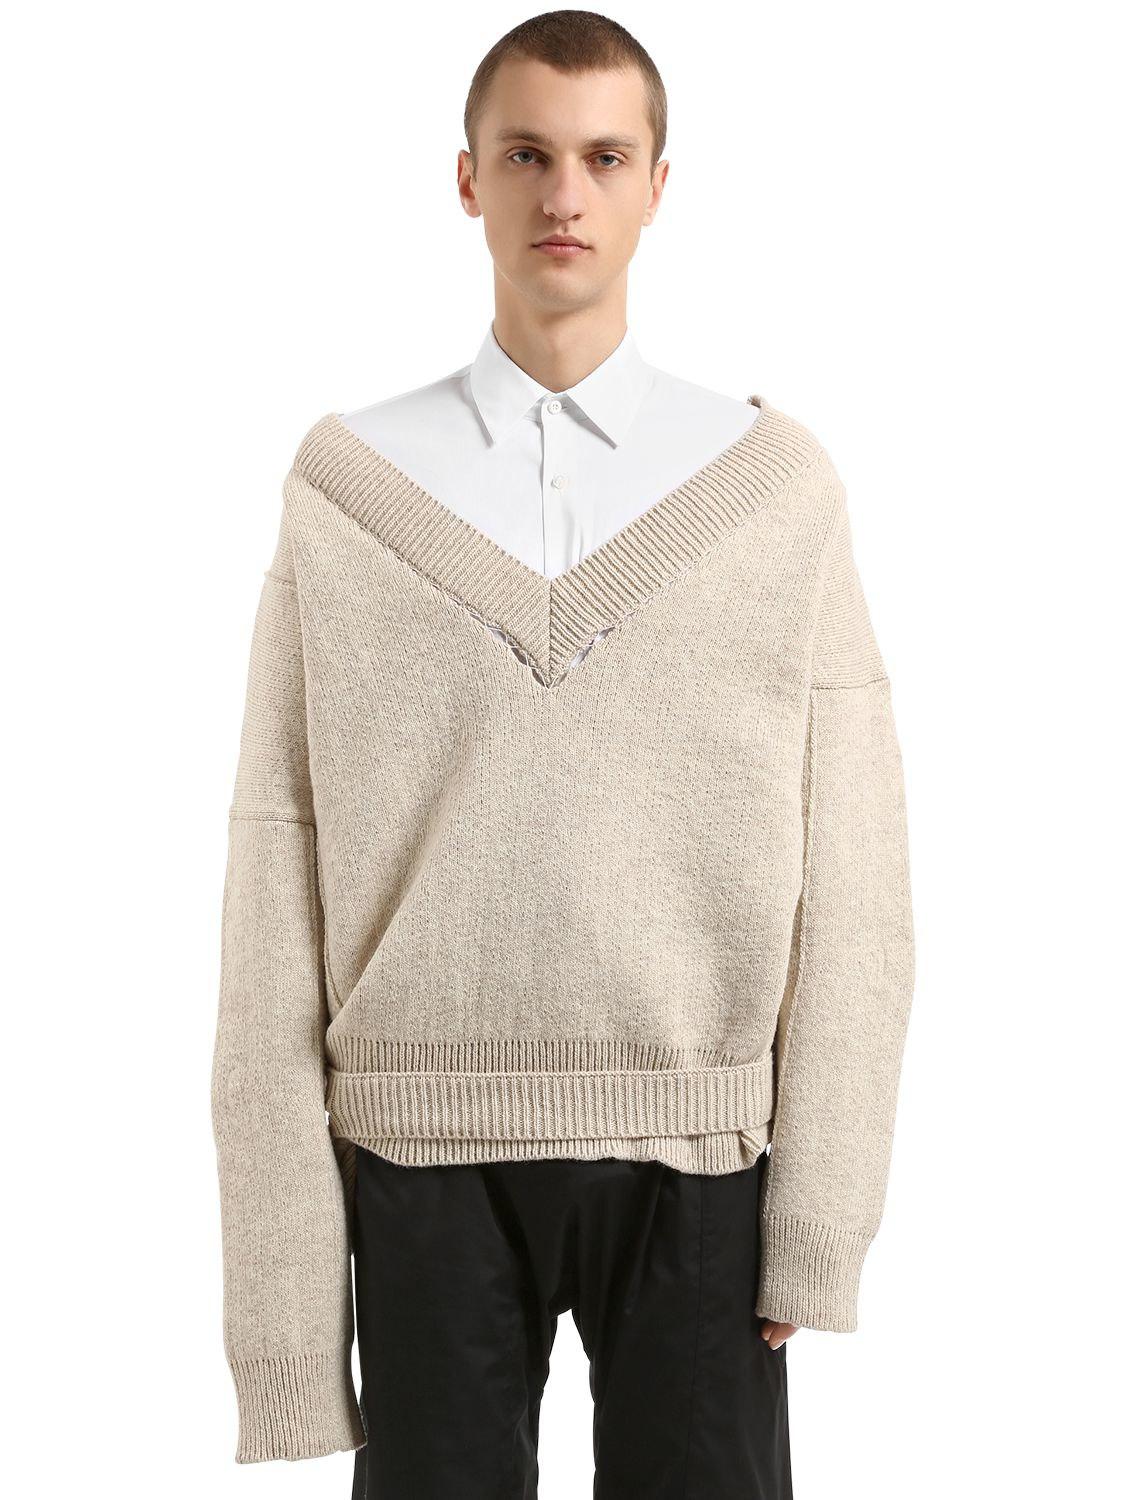 Raf Simons Oversized Wool Knit Sweater W/ Buckle in White for Men - Lyst